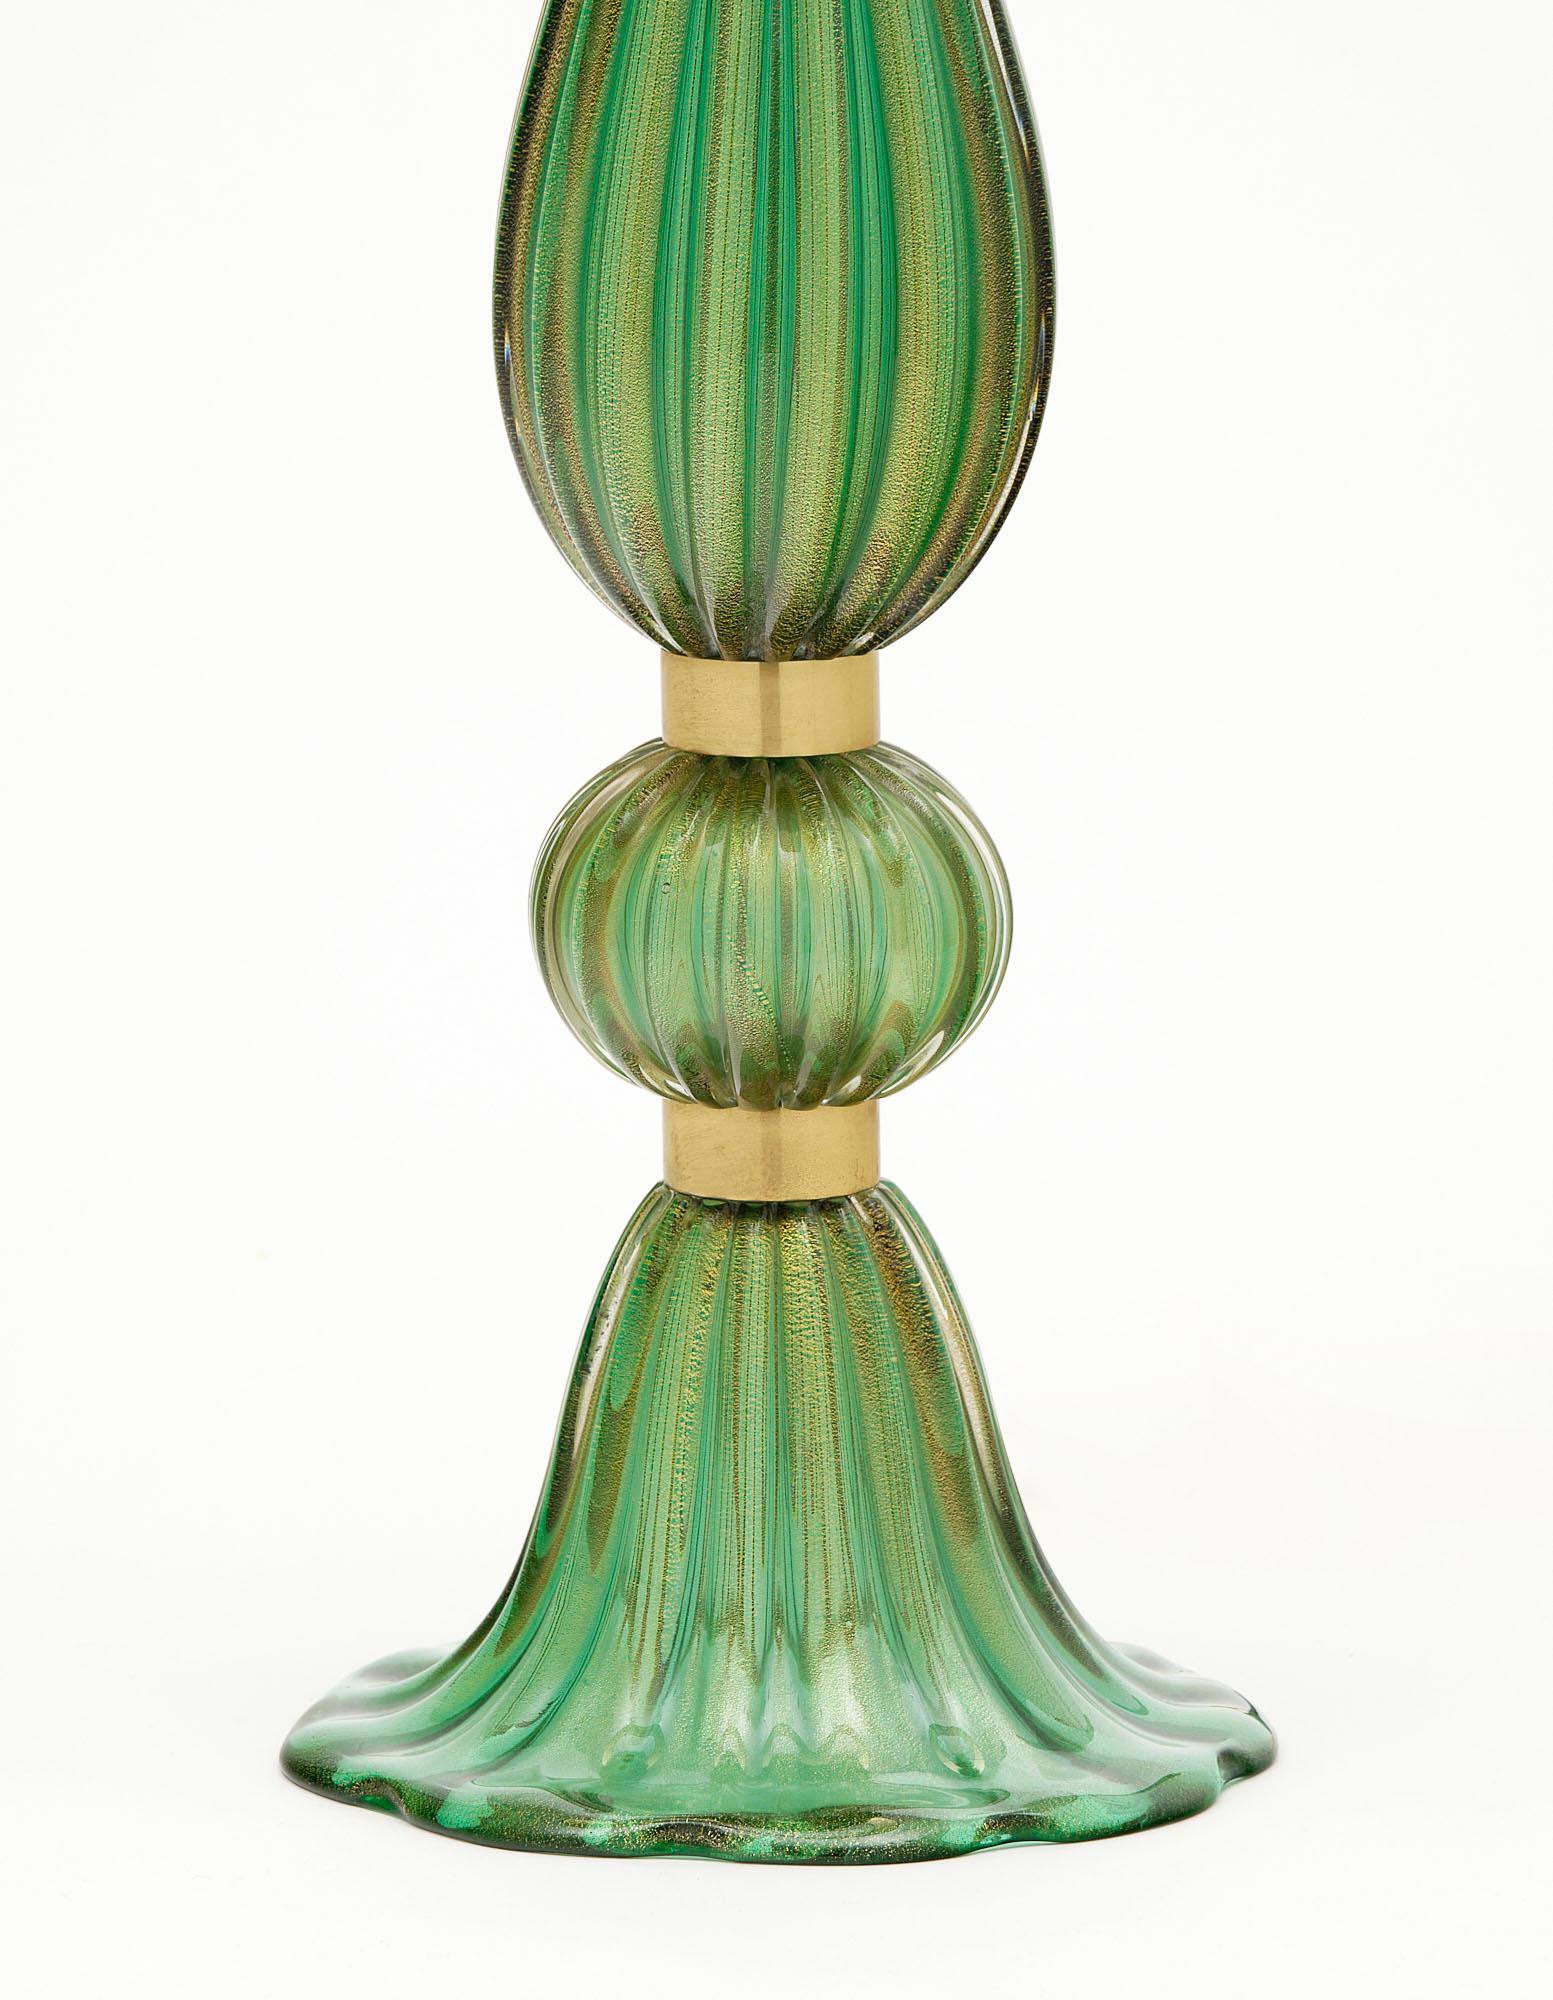 Pair of lamps from the island of Murano with ridged green glass blown and fused with 24 carat gold flecks in the “avventurina” technique. It is accented with gilt brass rings. They have been newly wired to fit US standards. Height to the top of the